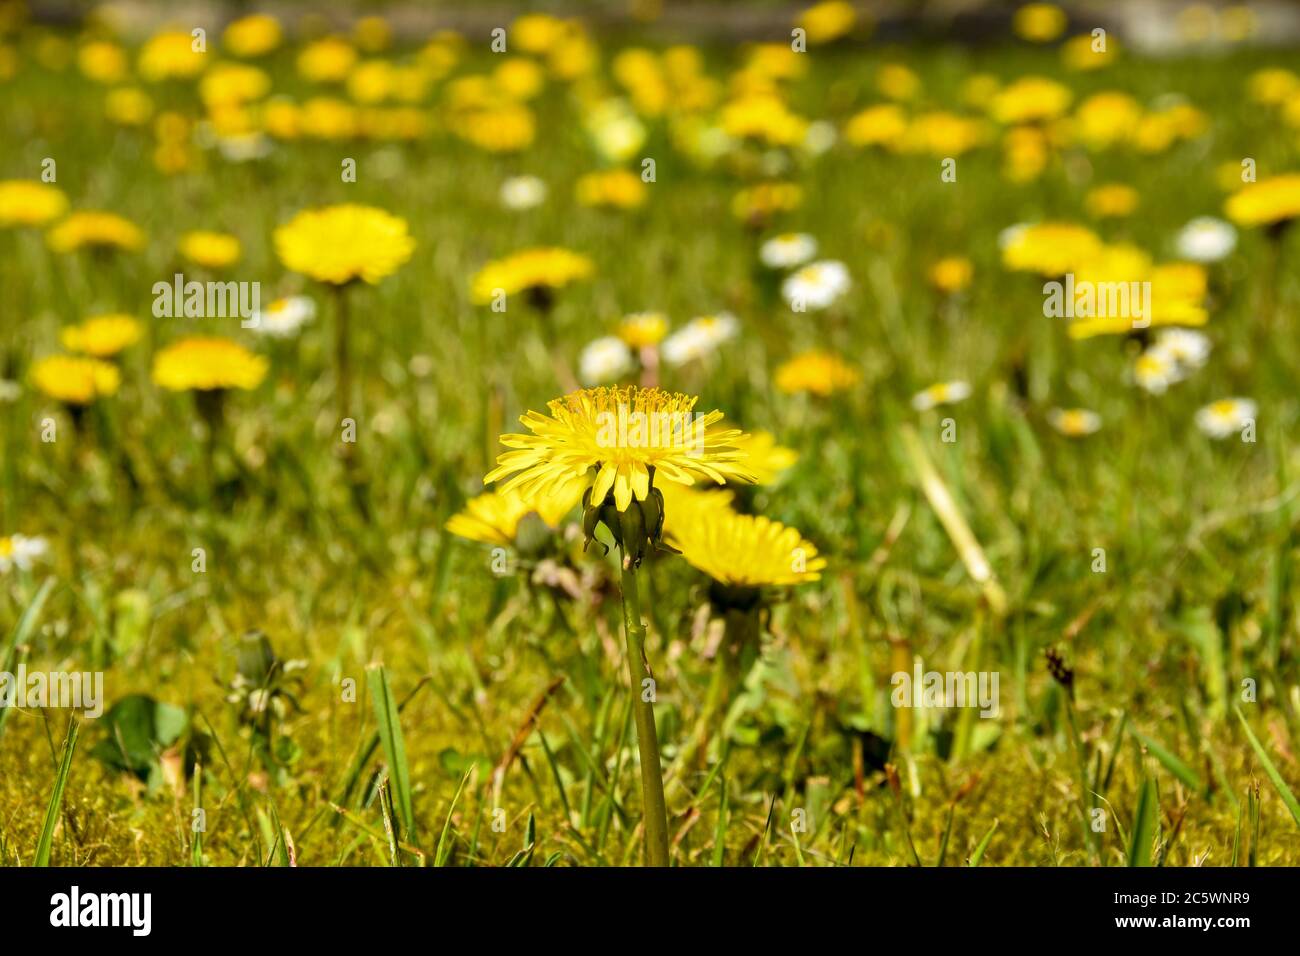 Close up view of a dandelion flower on a background of green grass with other dandelions blurred in background Stock Photo